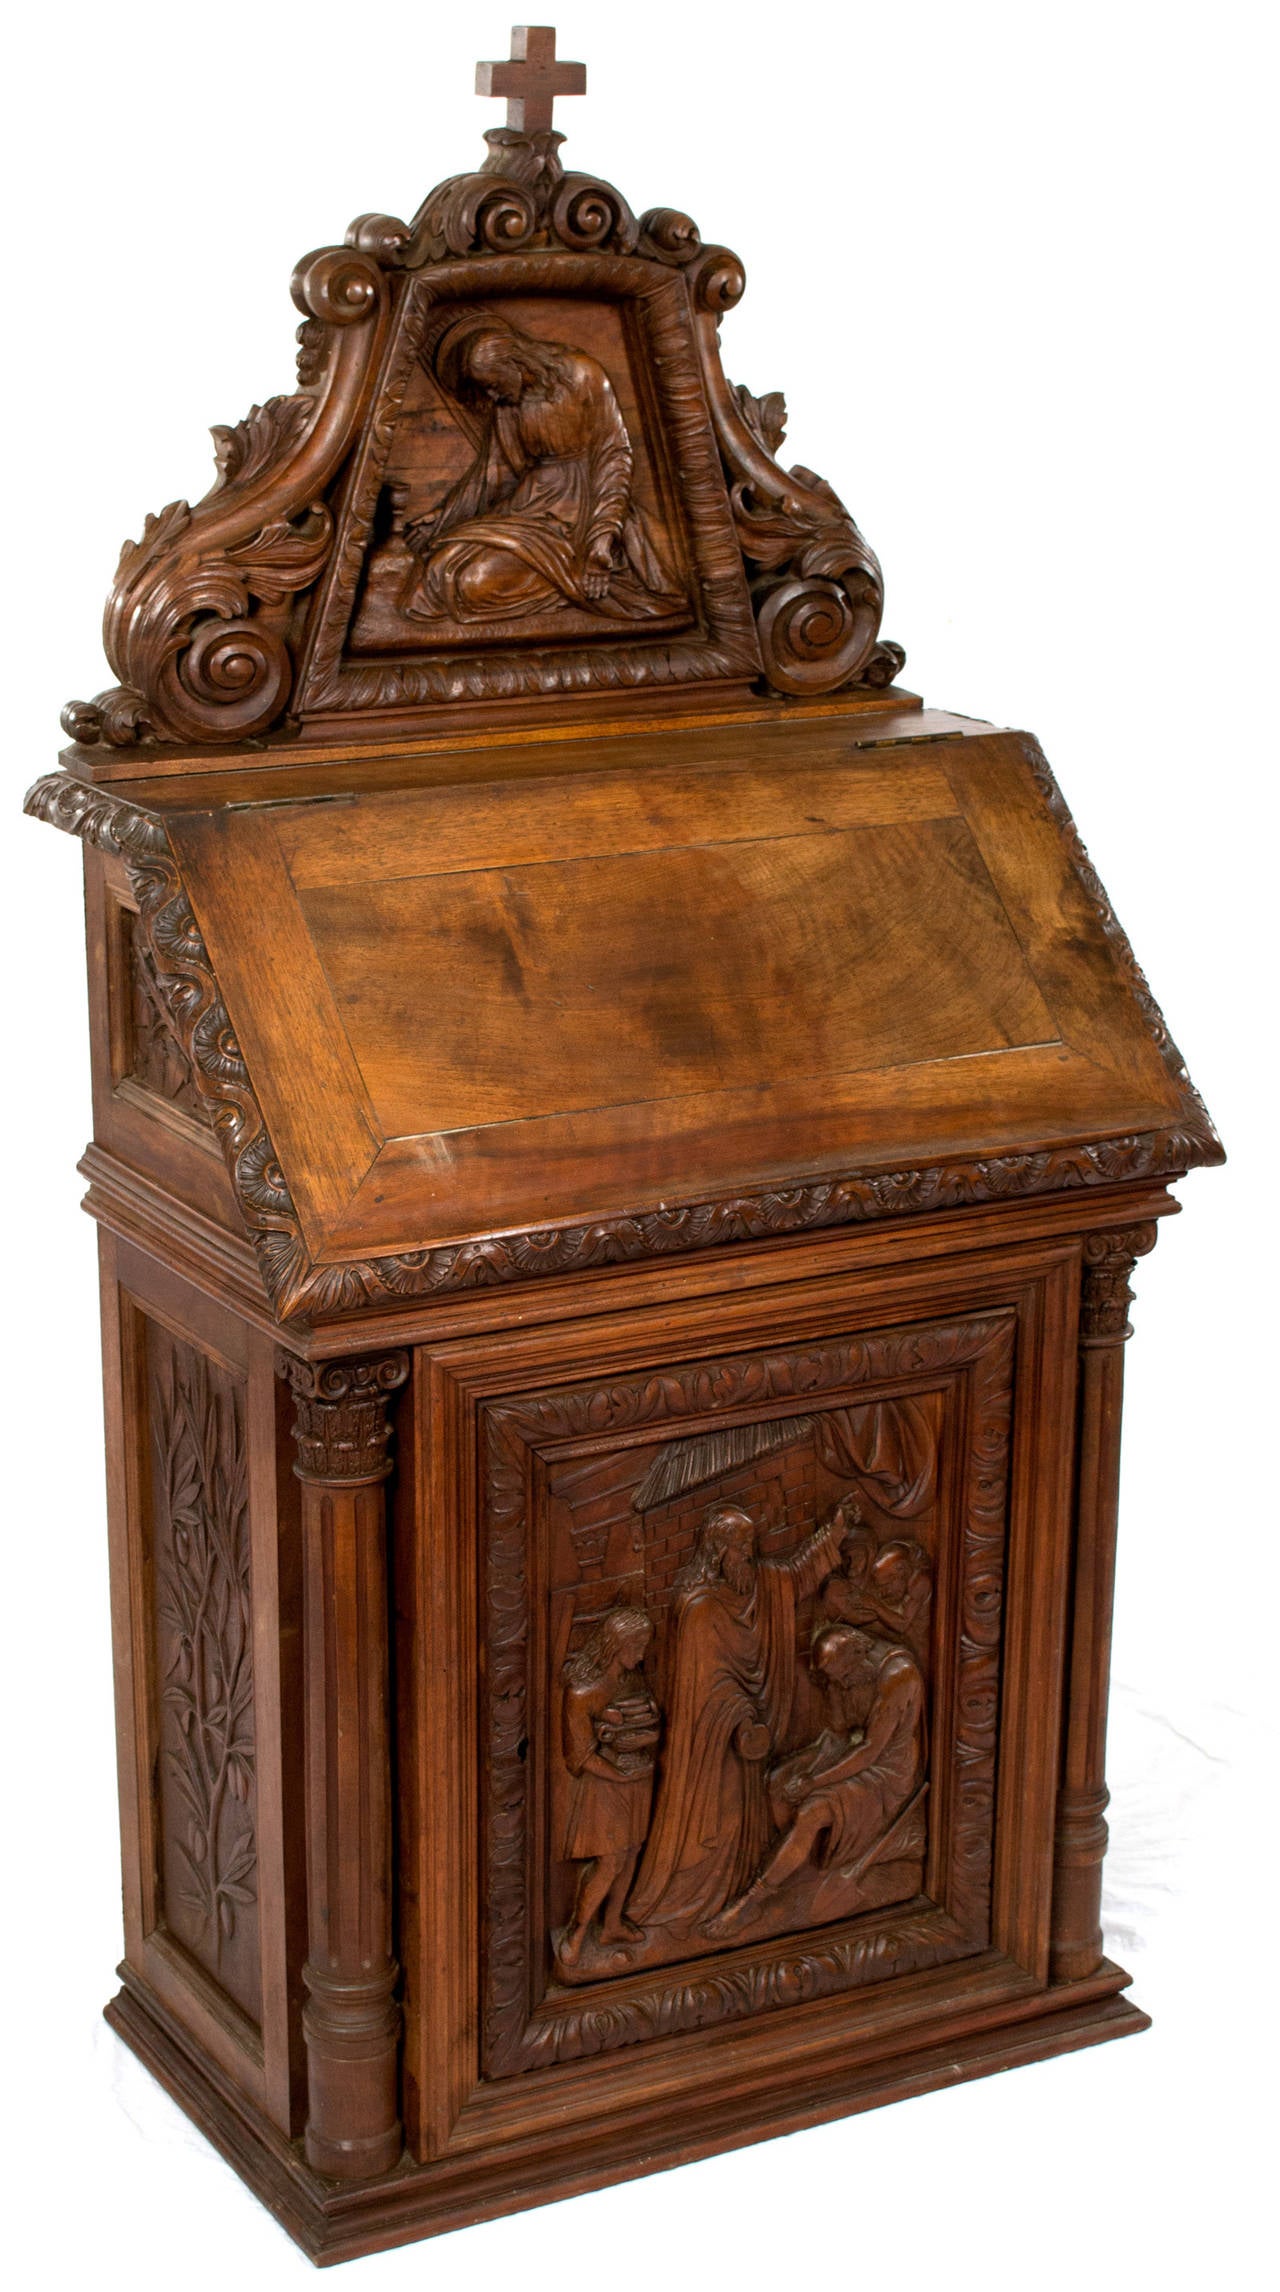 Beautifully carved with a scene of Christ praying in the Garden of Gethsemane (above) and a scene of Peter distributing bread to the hungry and poor, this French Walnut altar was made and used in a private home.